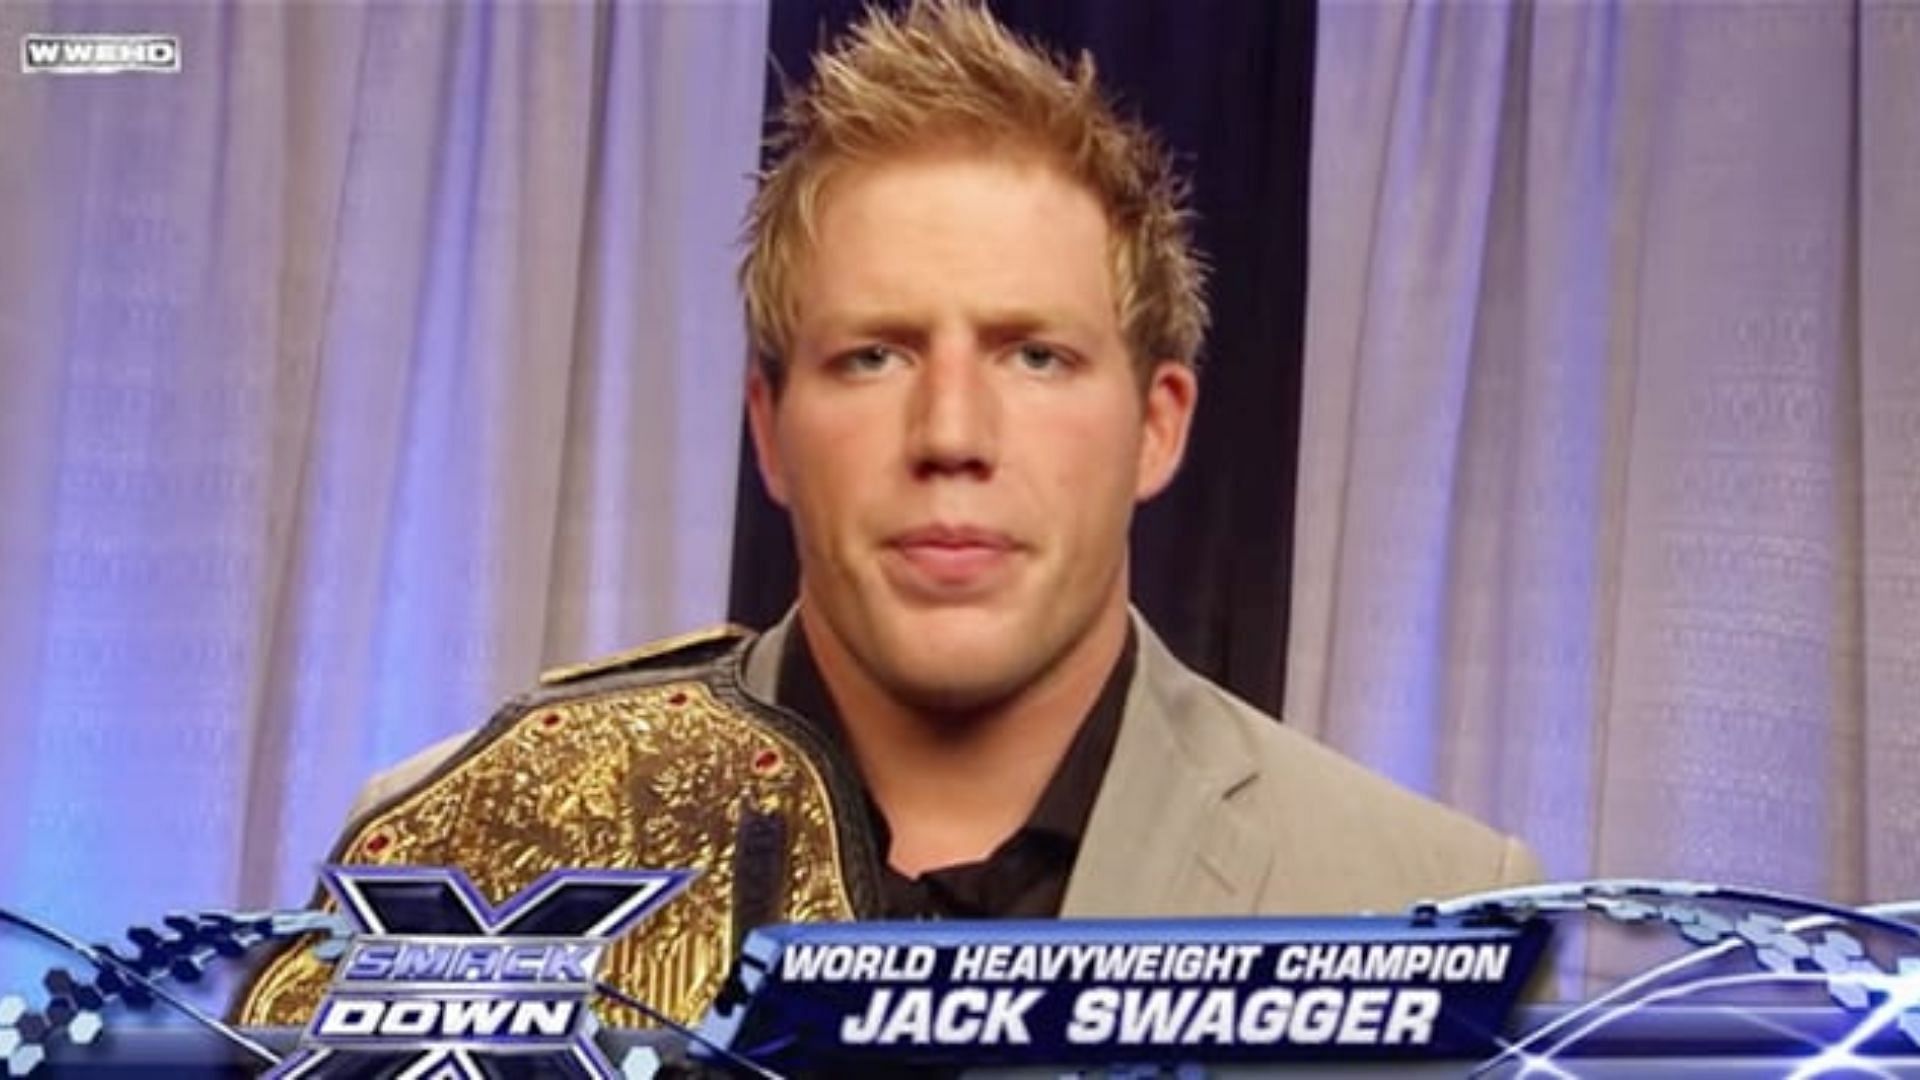 Swagger would cash-in his Money in the Bank contract on Chris Jericho